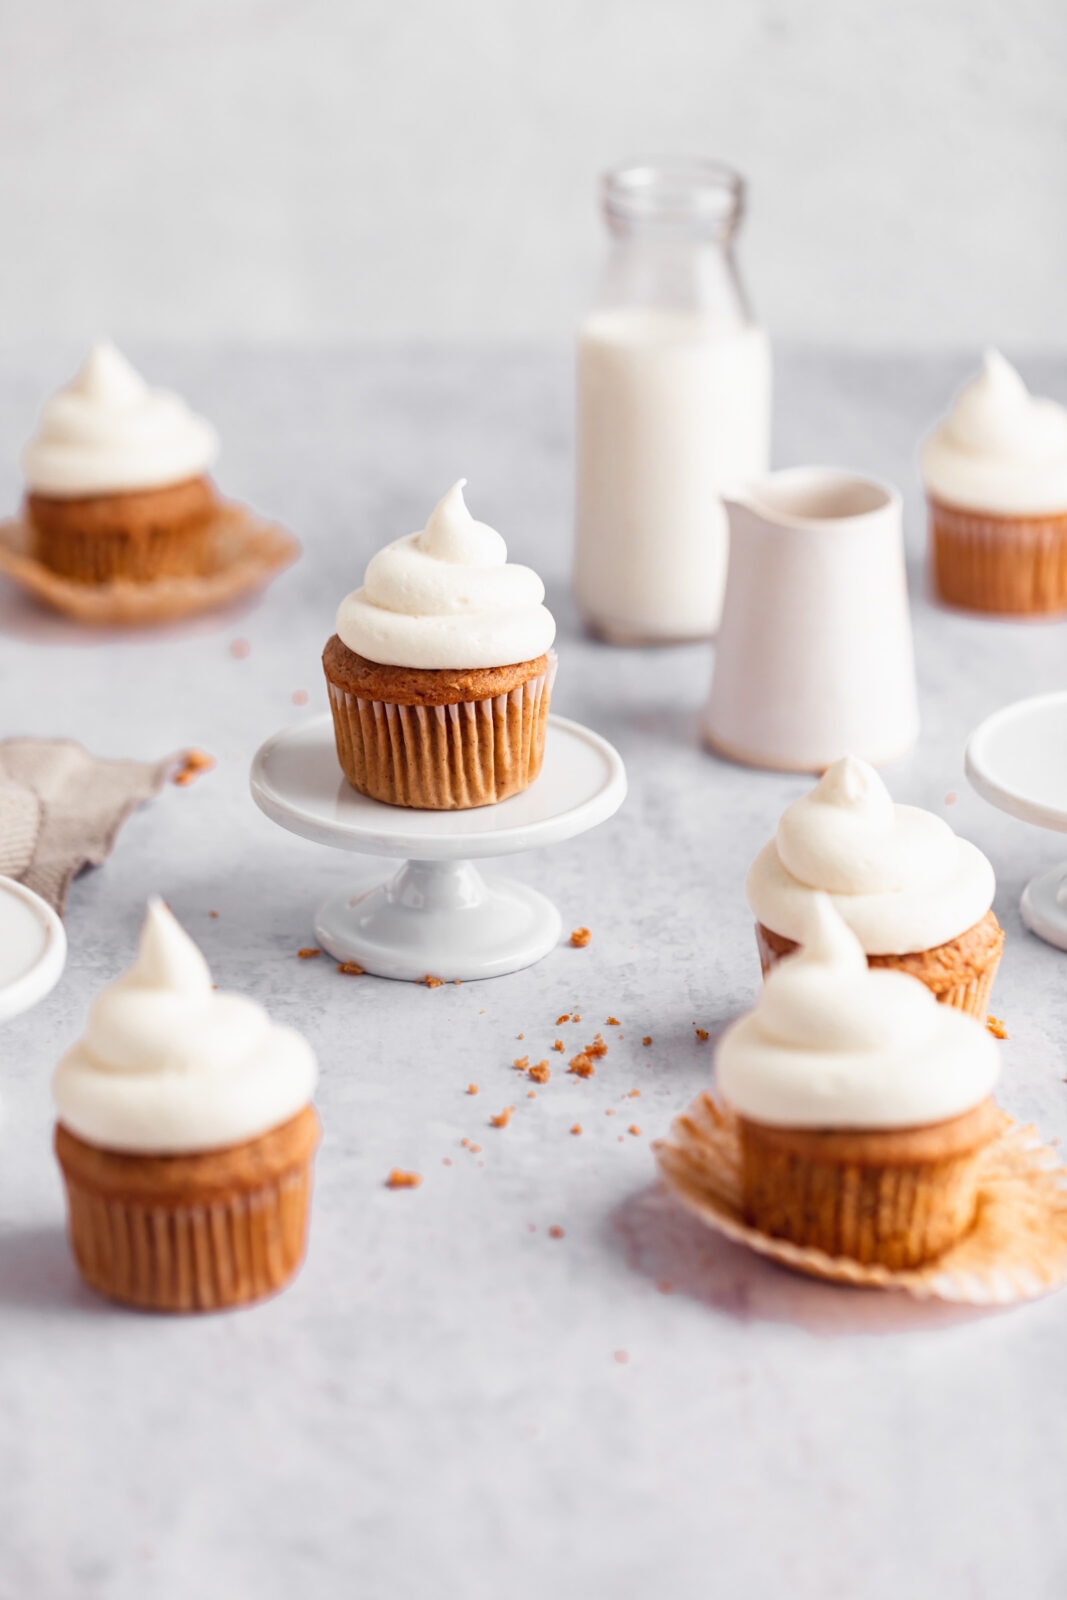 carrot cake cupcakes with cream cheese frosting on a cake stand